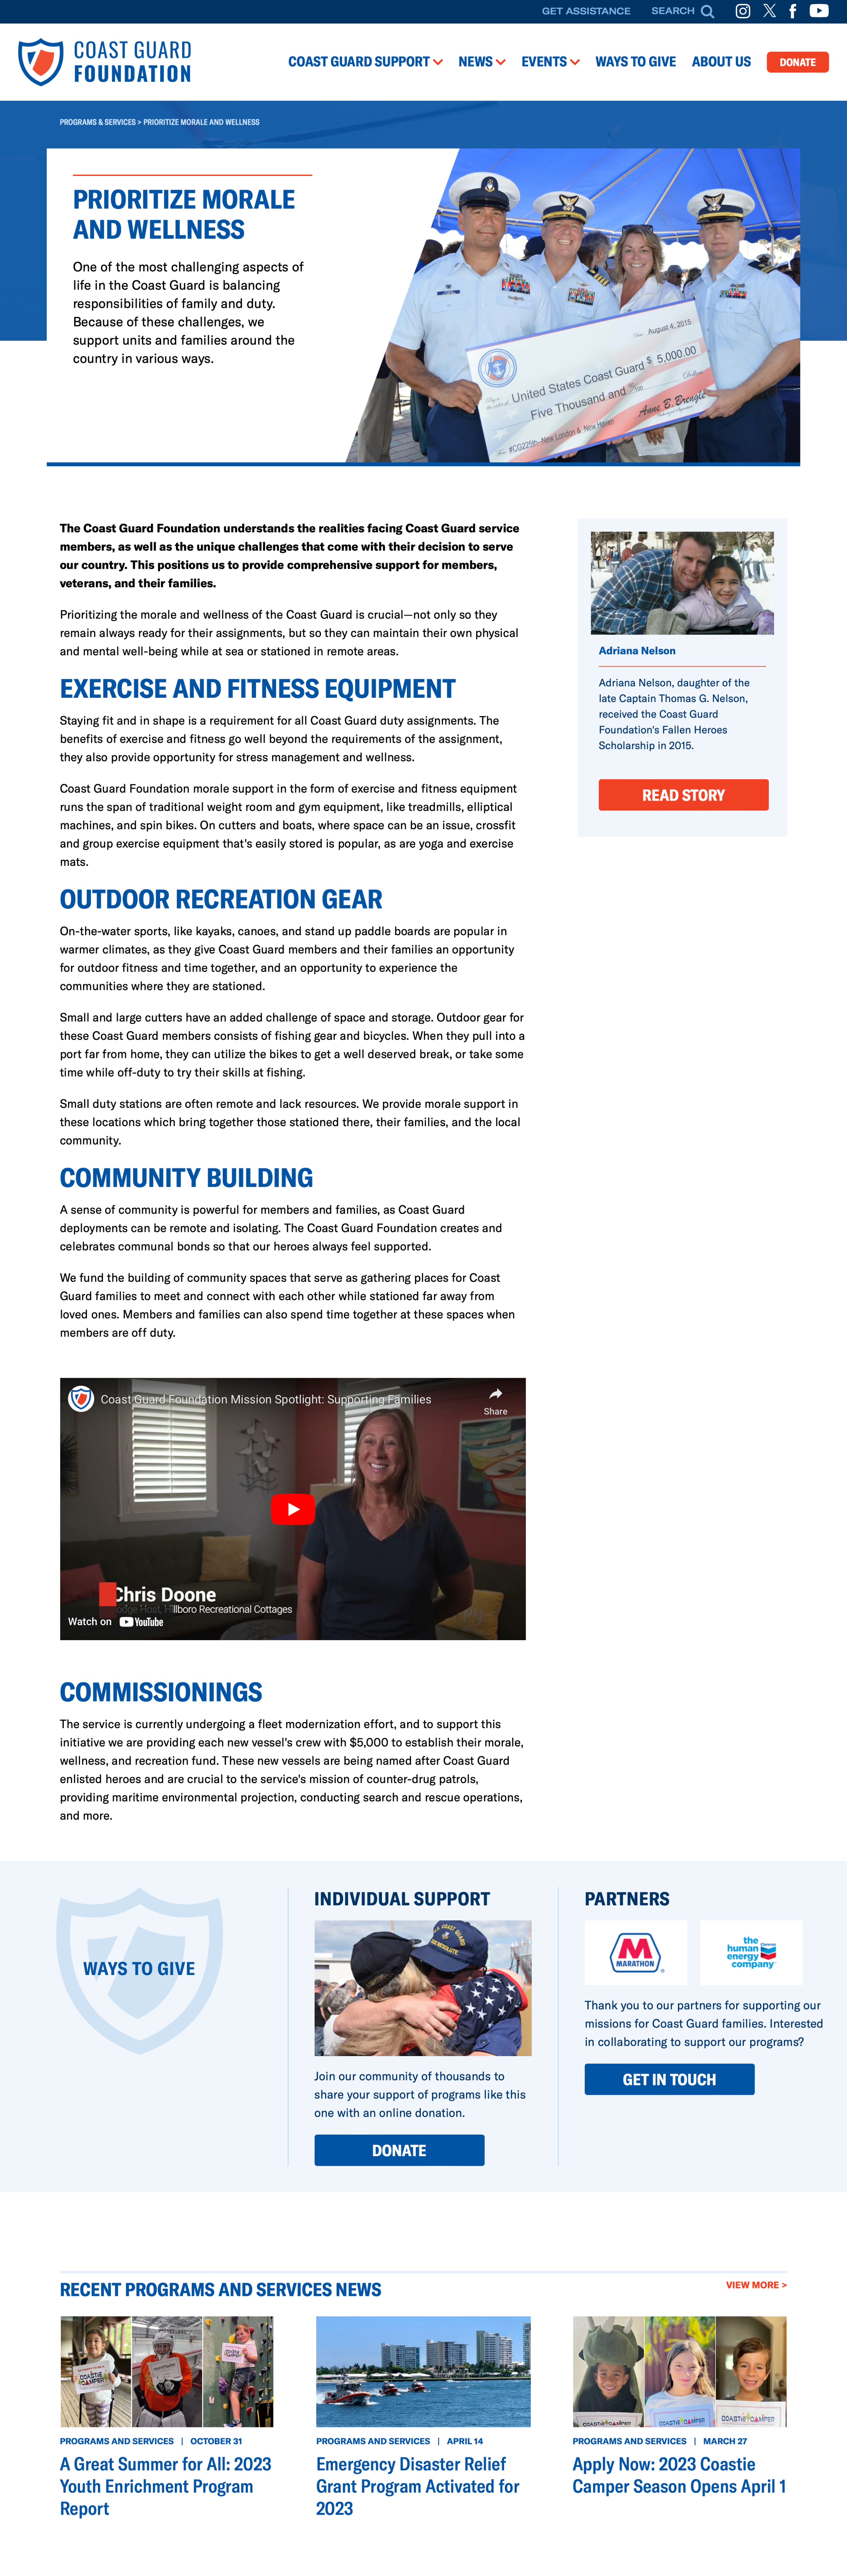 Example program page from coastguardfoundation.org that includes impact stories, highlights supporting partners, and recent program and services news.